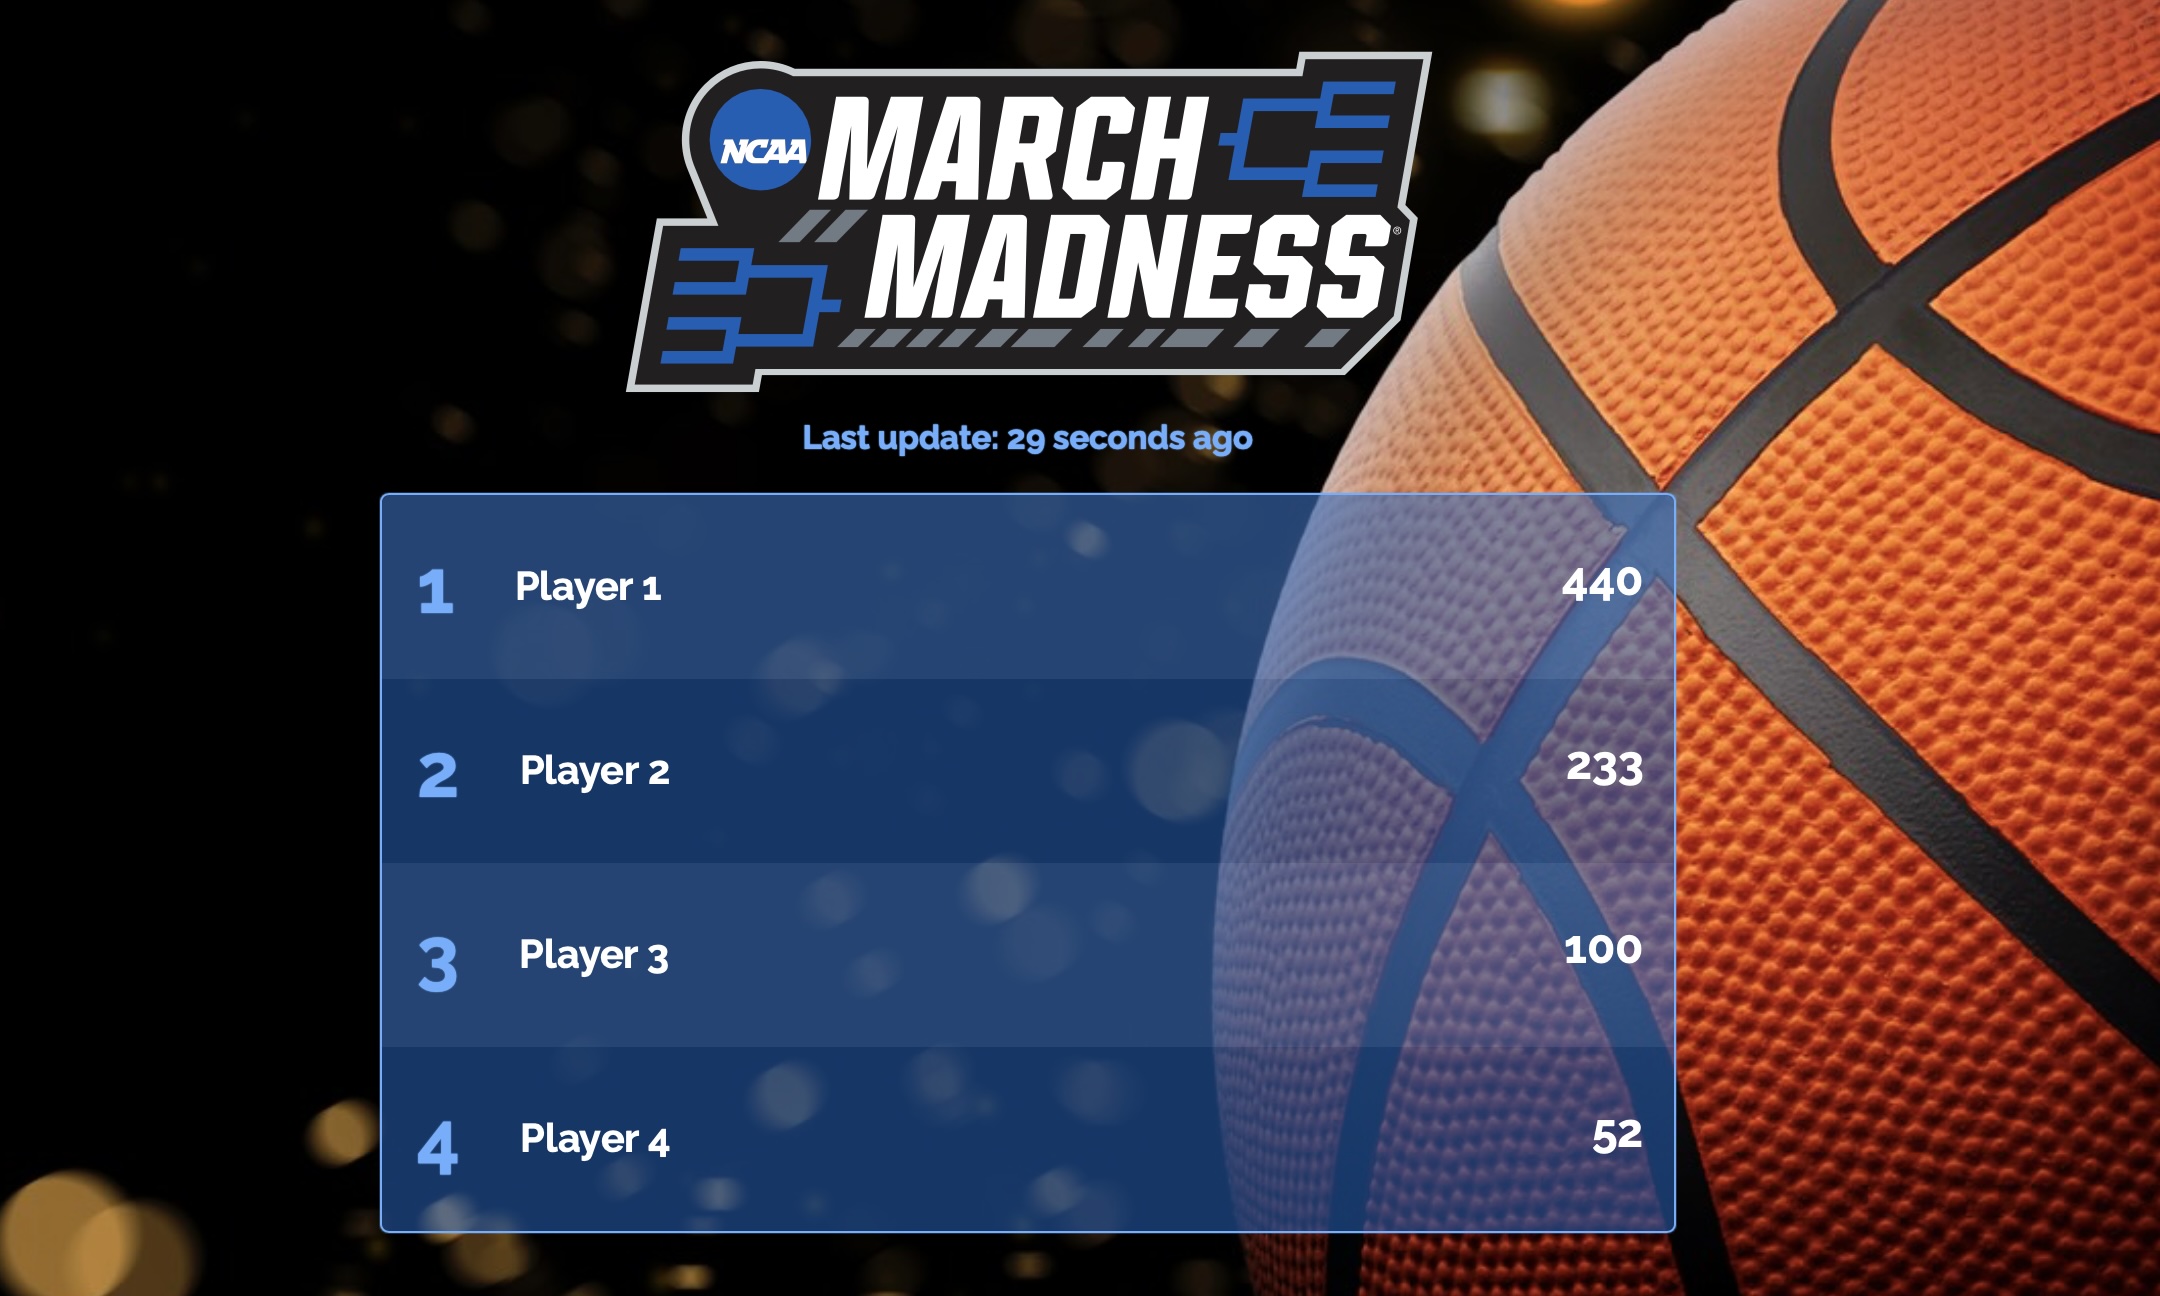 Discover how to create engaging March Madness leaderboards, tailor them to your preferences, and share with your community or friends.